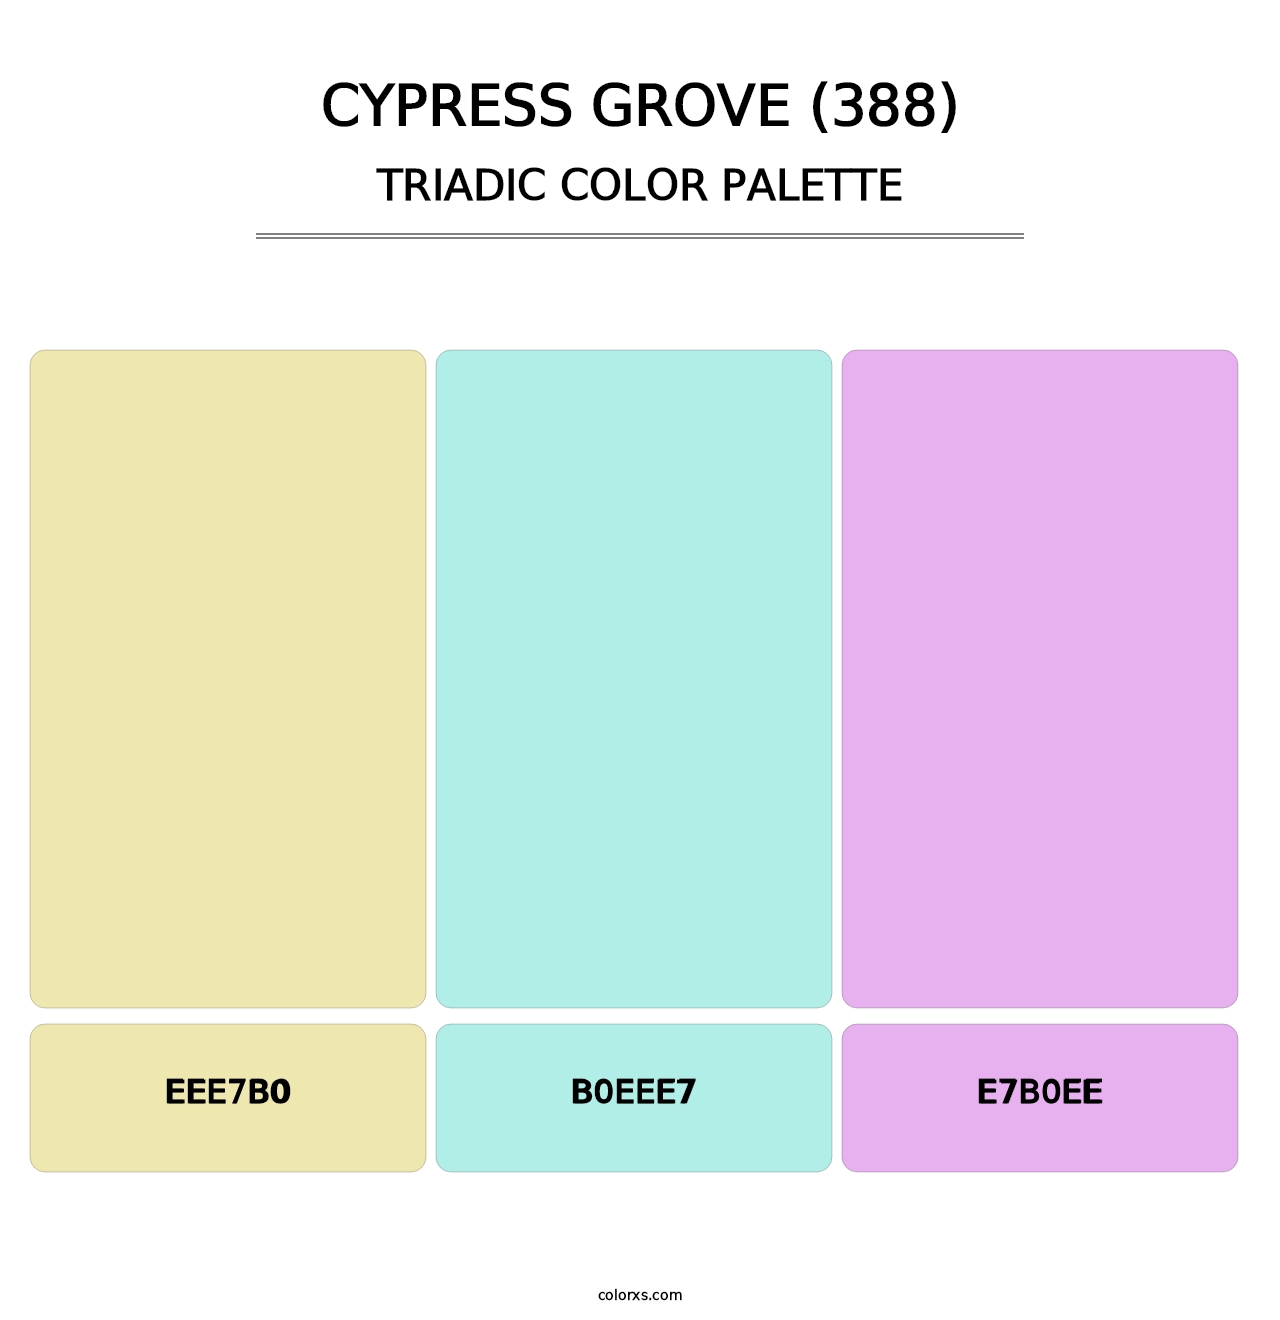 Cypress Grove (388) - Triadic Color Palette